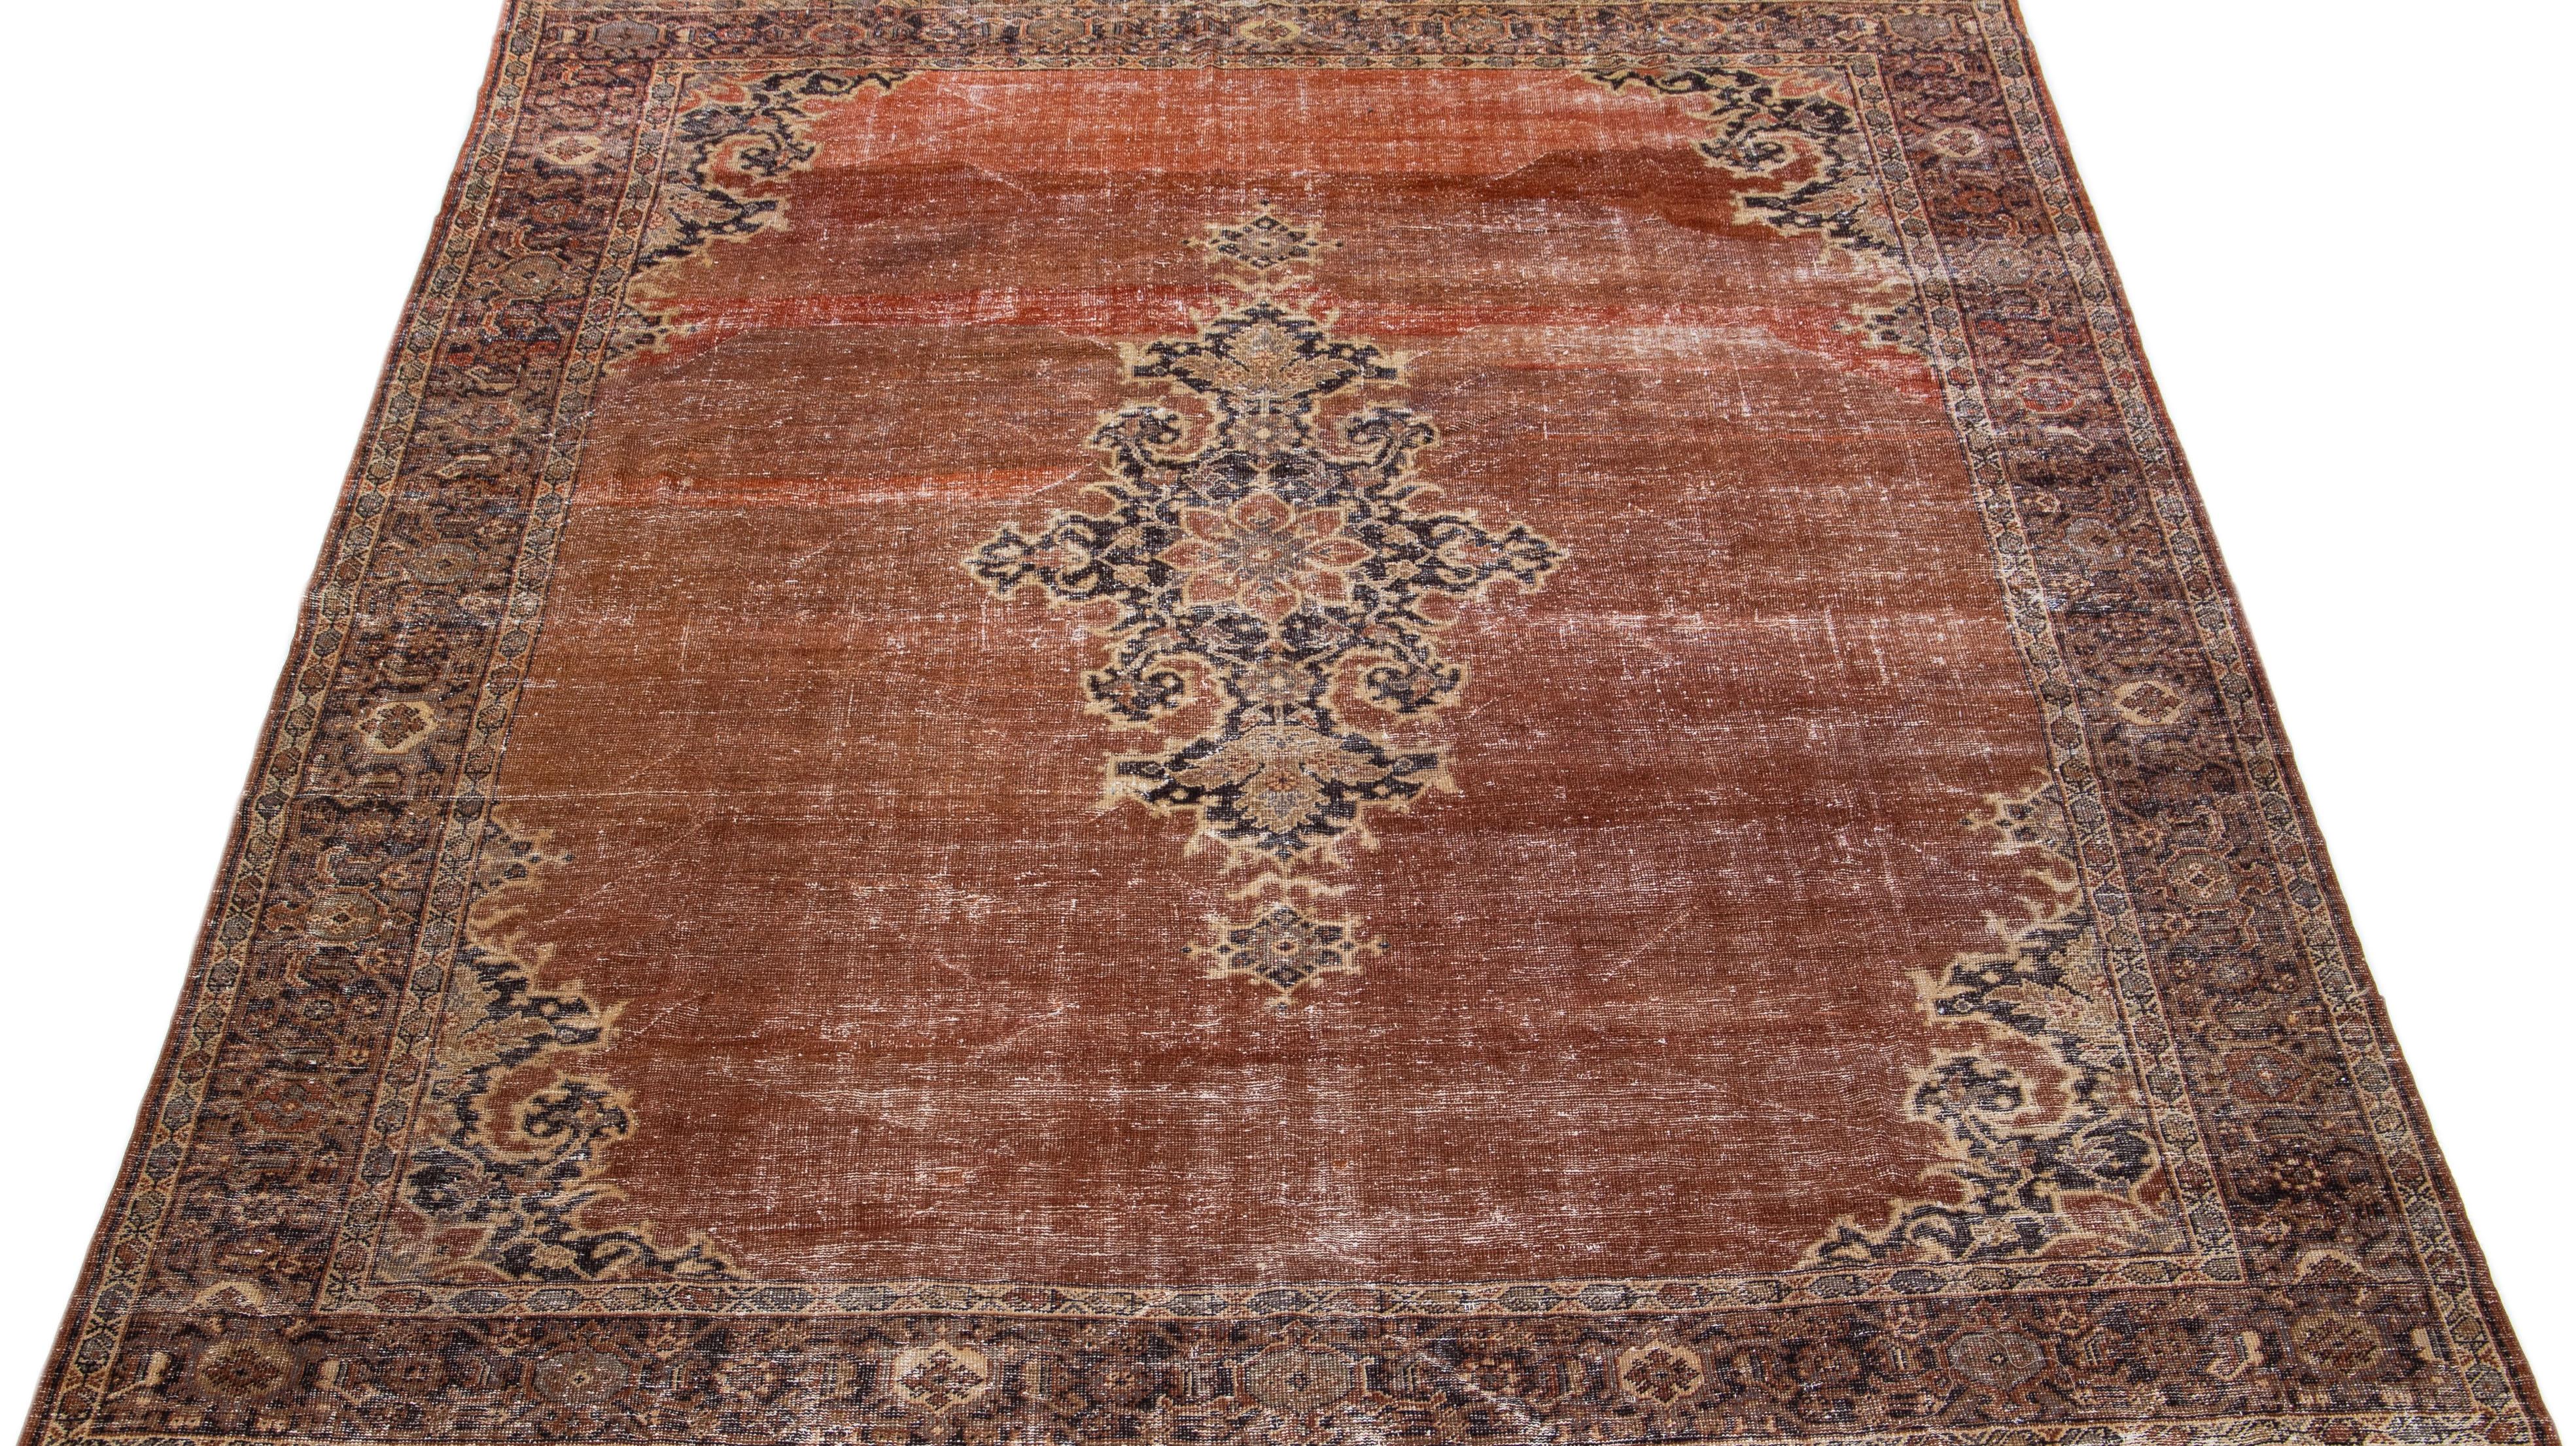 Beautiful antique Persian hand-knotted wool rug with a copper color field. This piece has a designed frame with tan and brown accents in a gorgeous all-over design.

This rug measures: 9'8' x 11'6